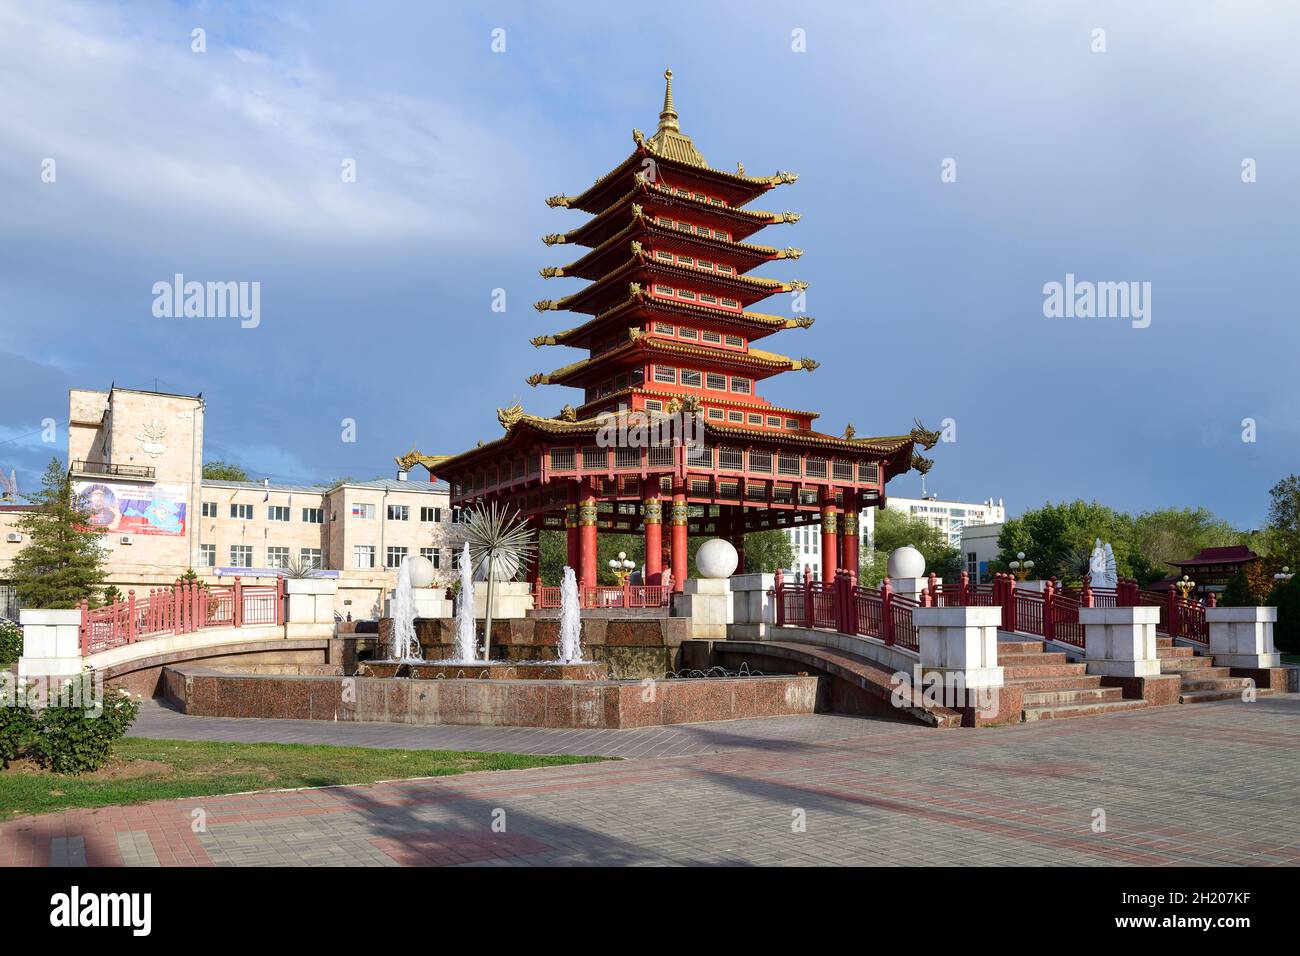 ELISTA, RUSSIA - SEPTEMBER 20, 2021: View of the Seven Days Buddhist Pagoda on a September afternoon Stock Photo